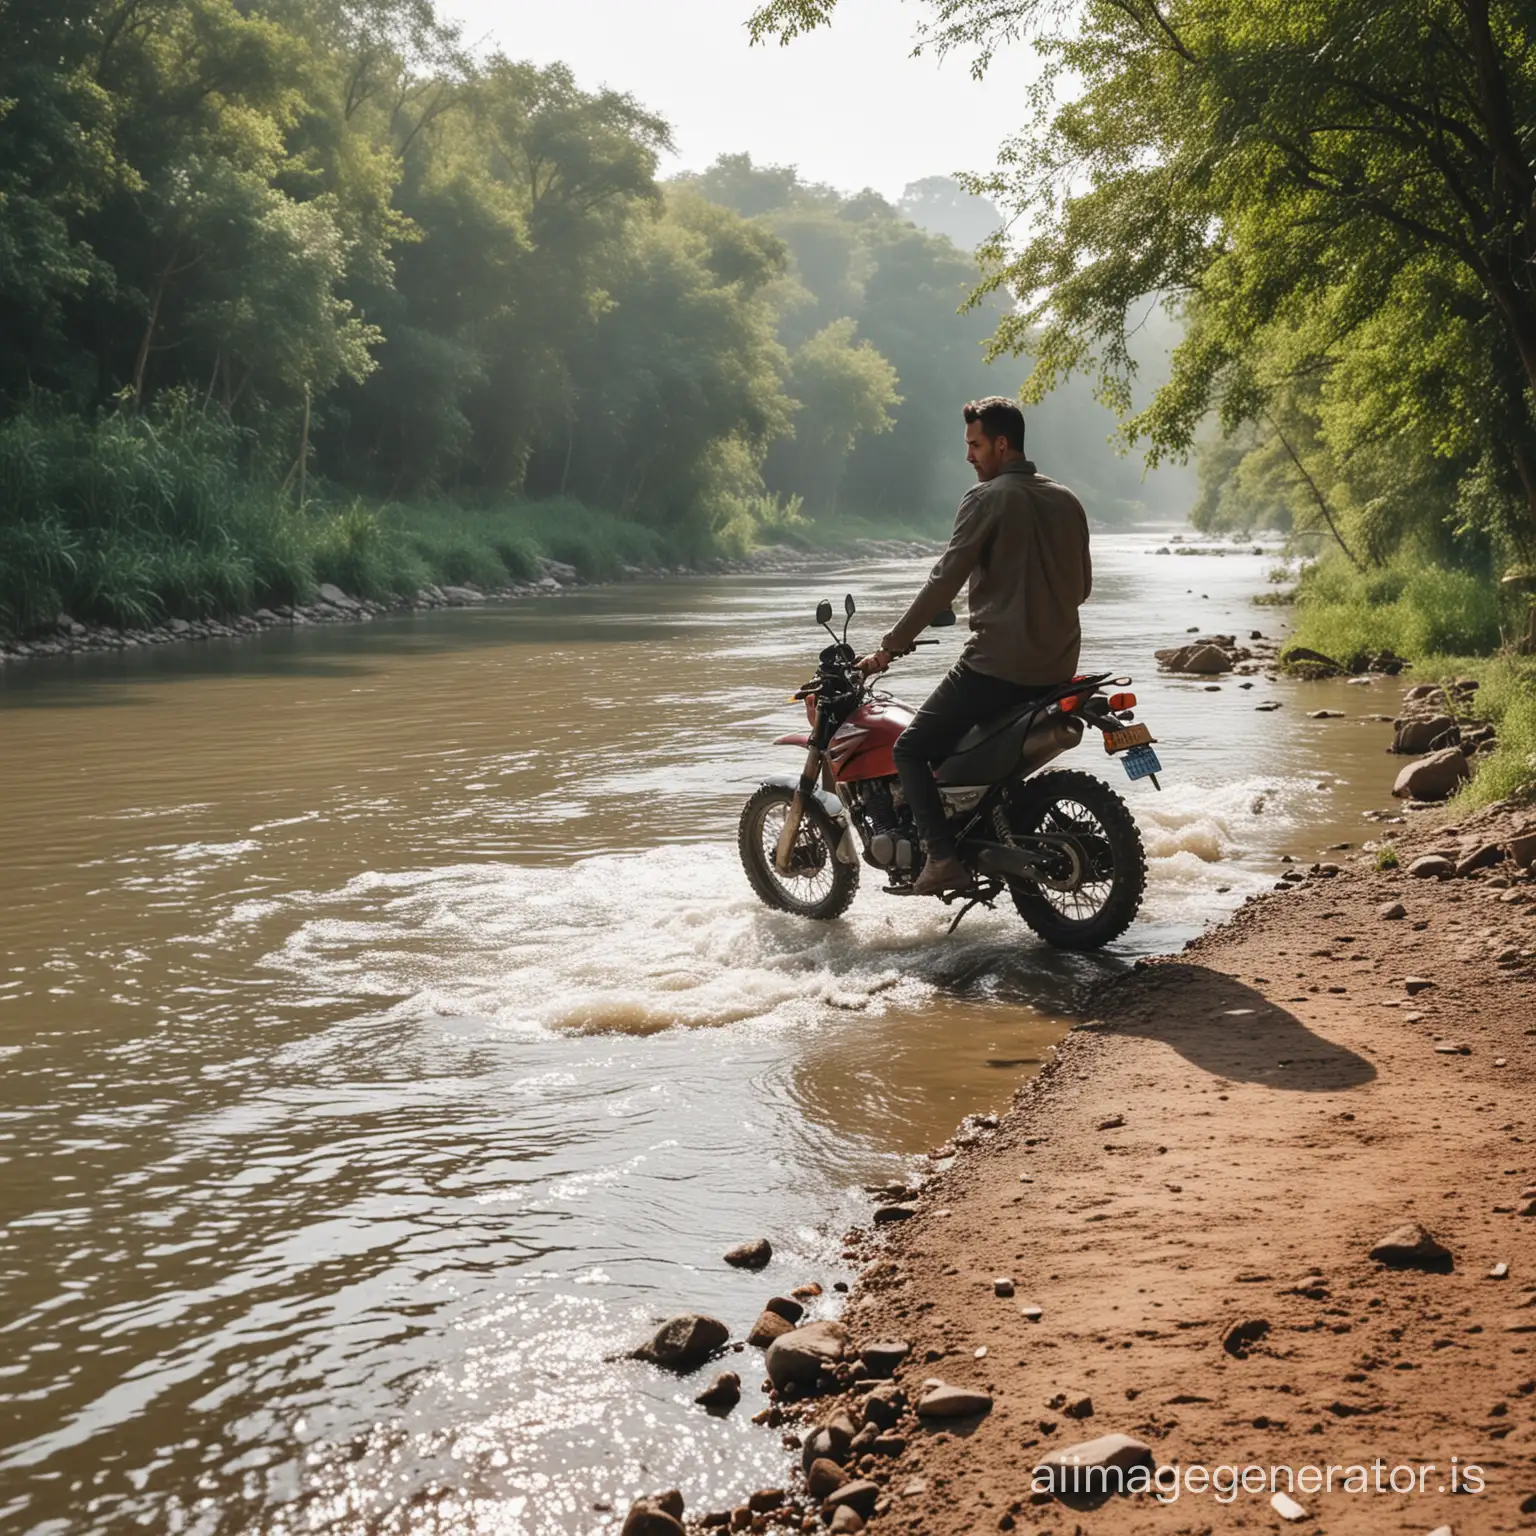 Man on motorbike down by the river